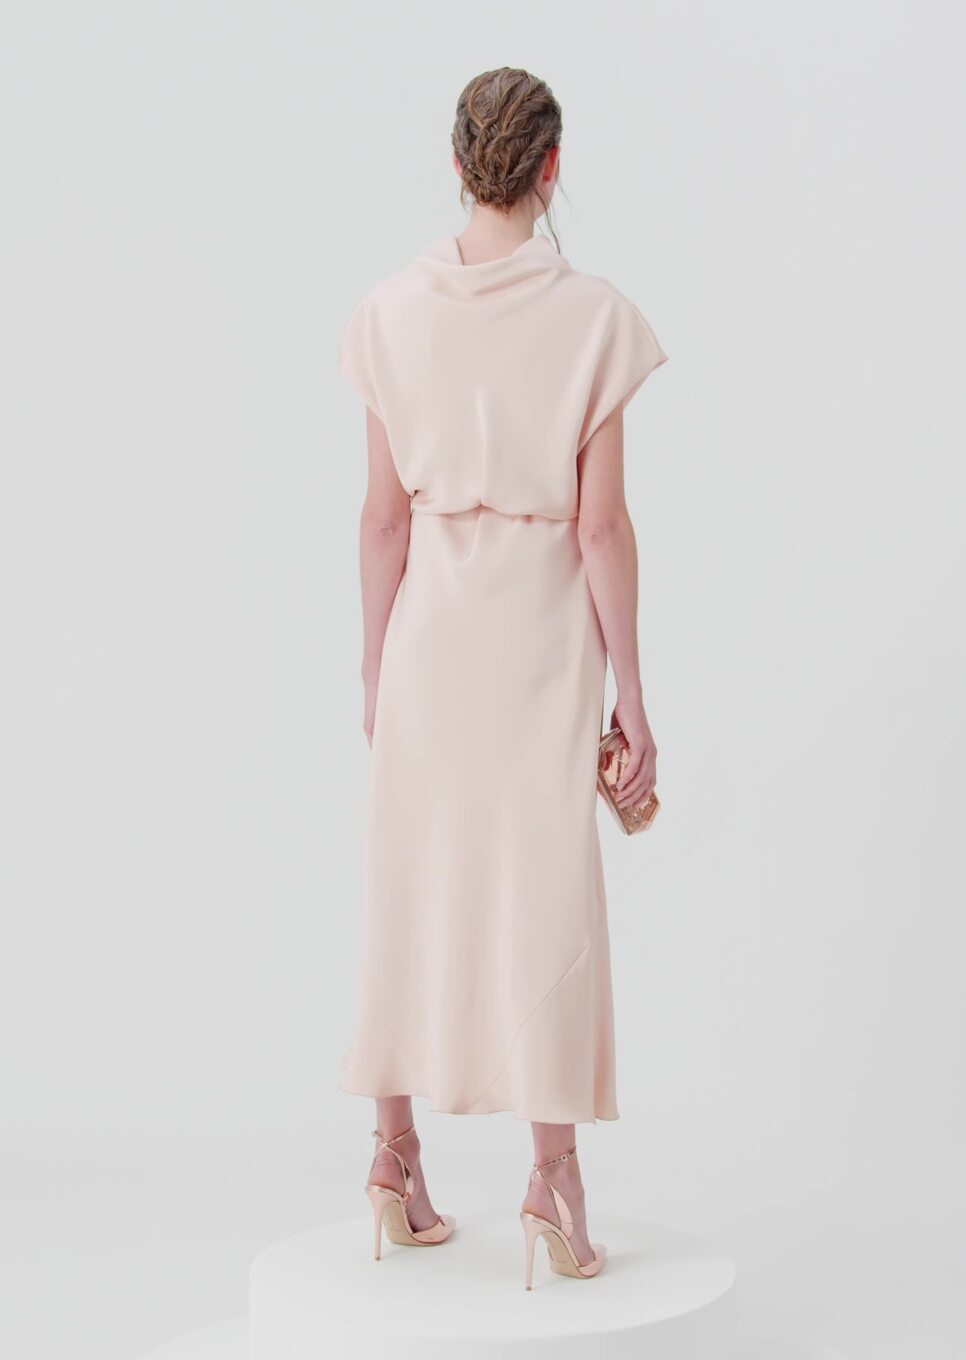 Help me style this Zara draped midi dress for a casual holiday get